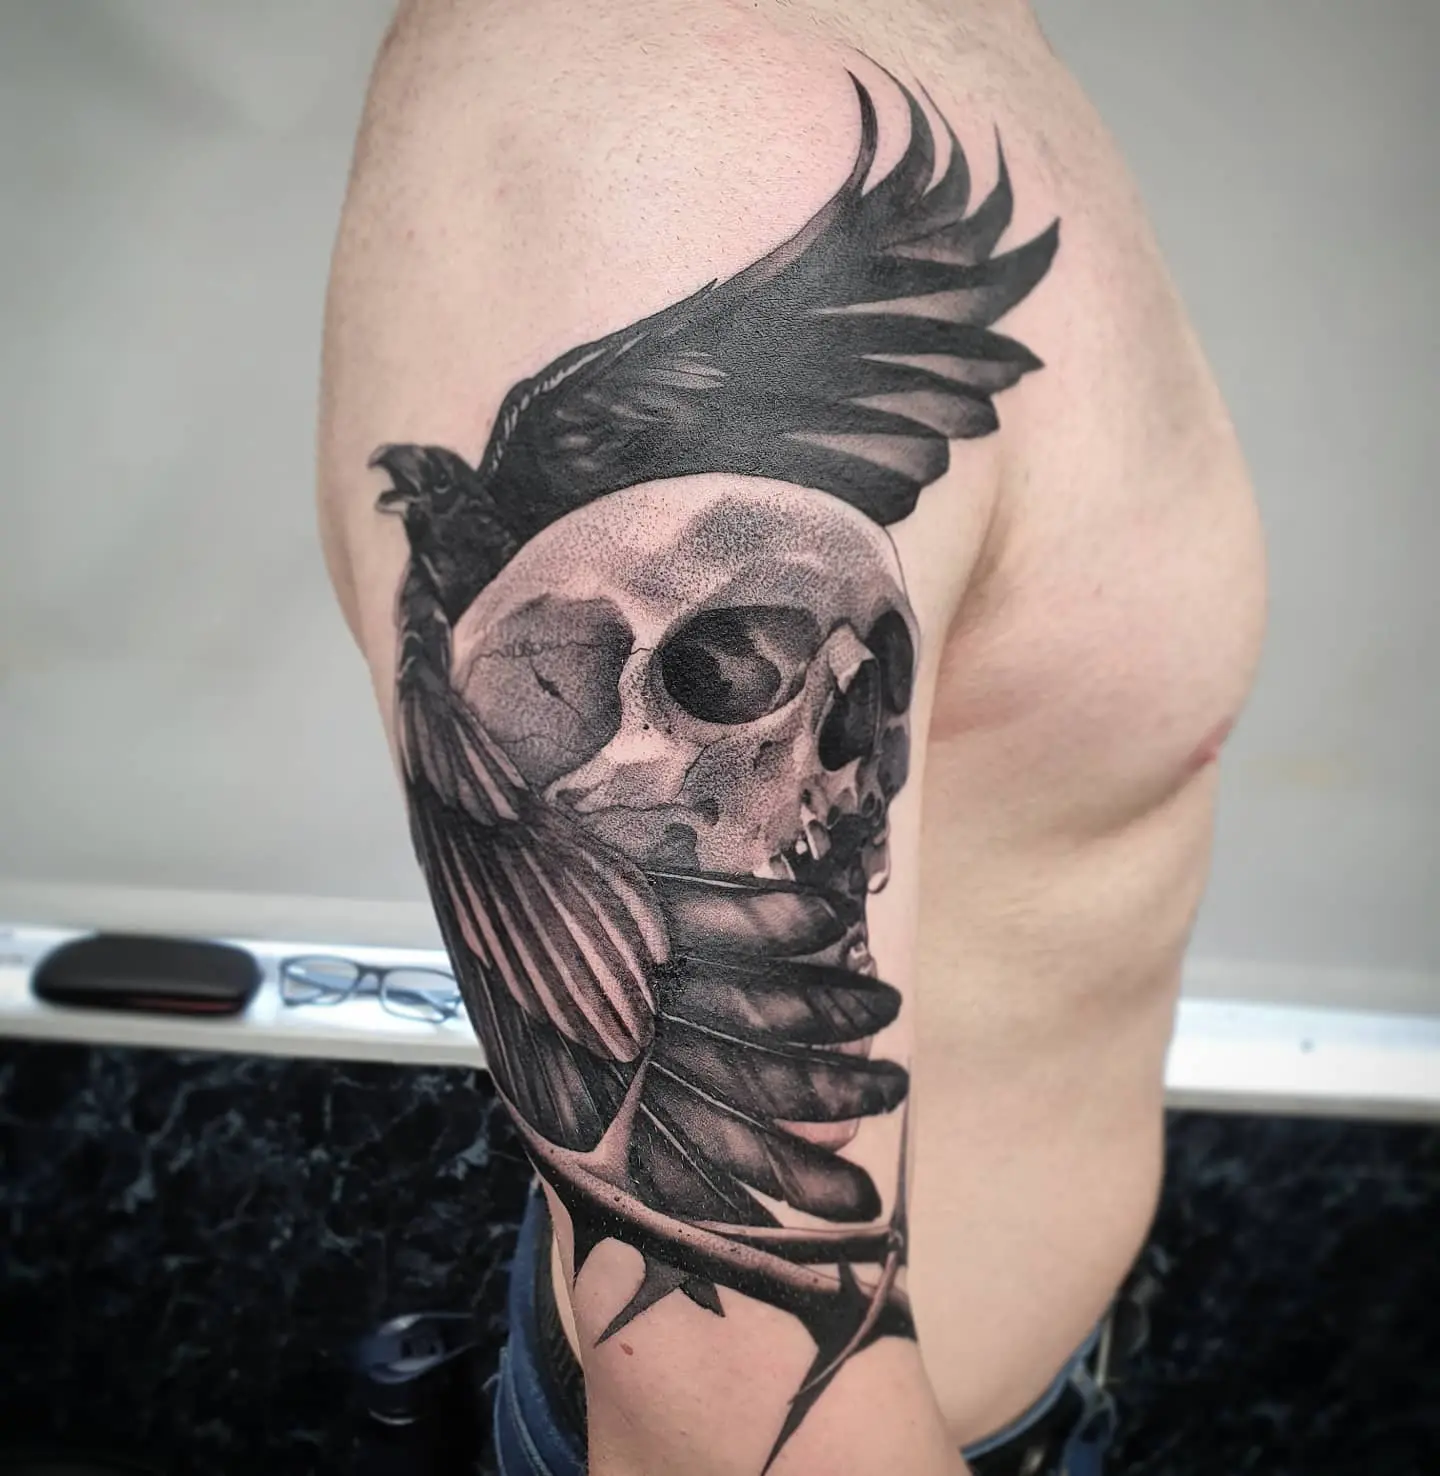 Raven skull done by Tyler Nguyen out of My Little Needle Tattoos Plymouth  MI  rtattoos